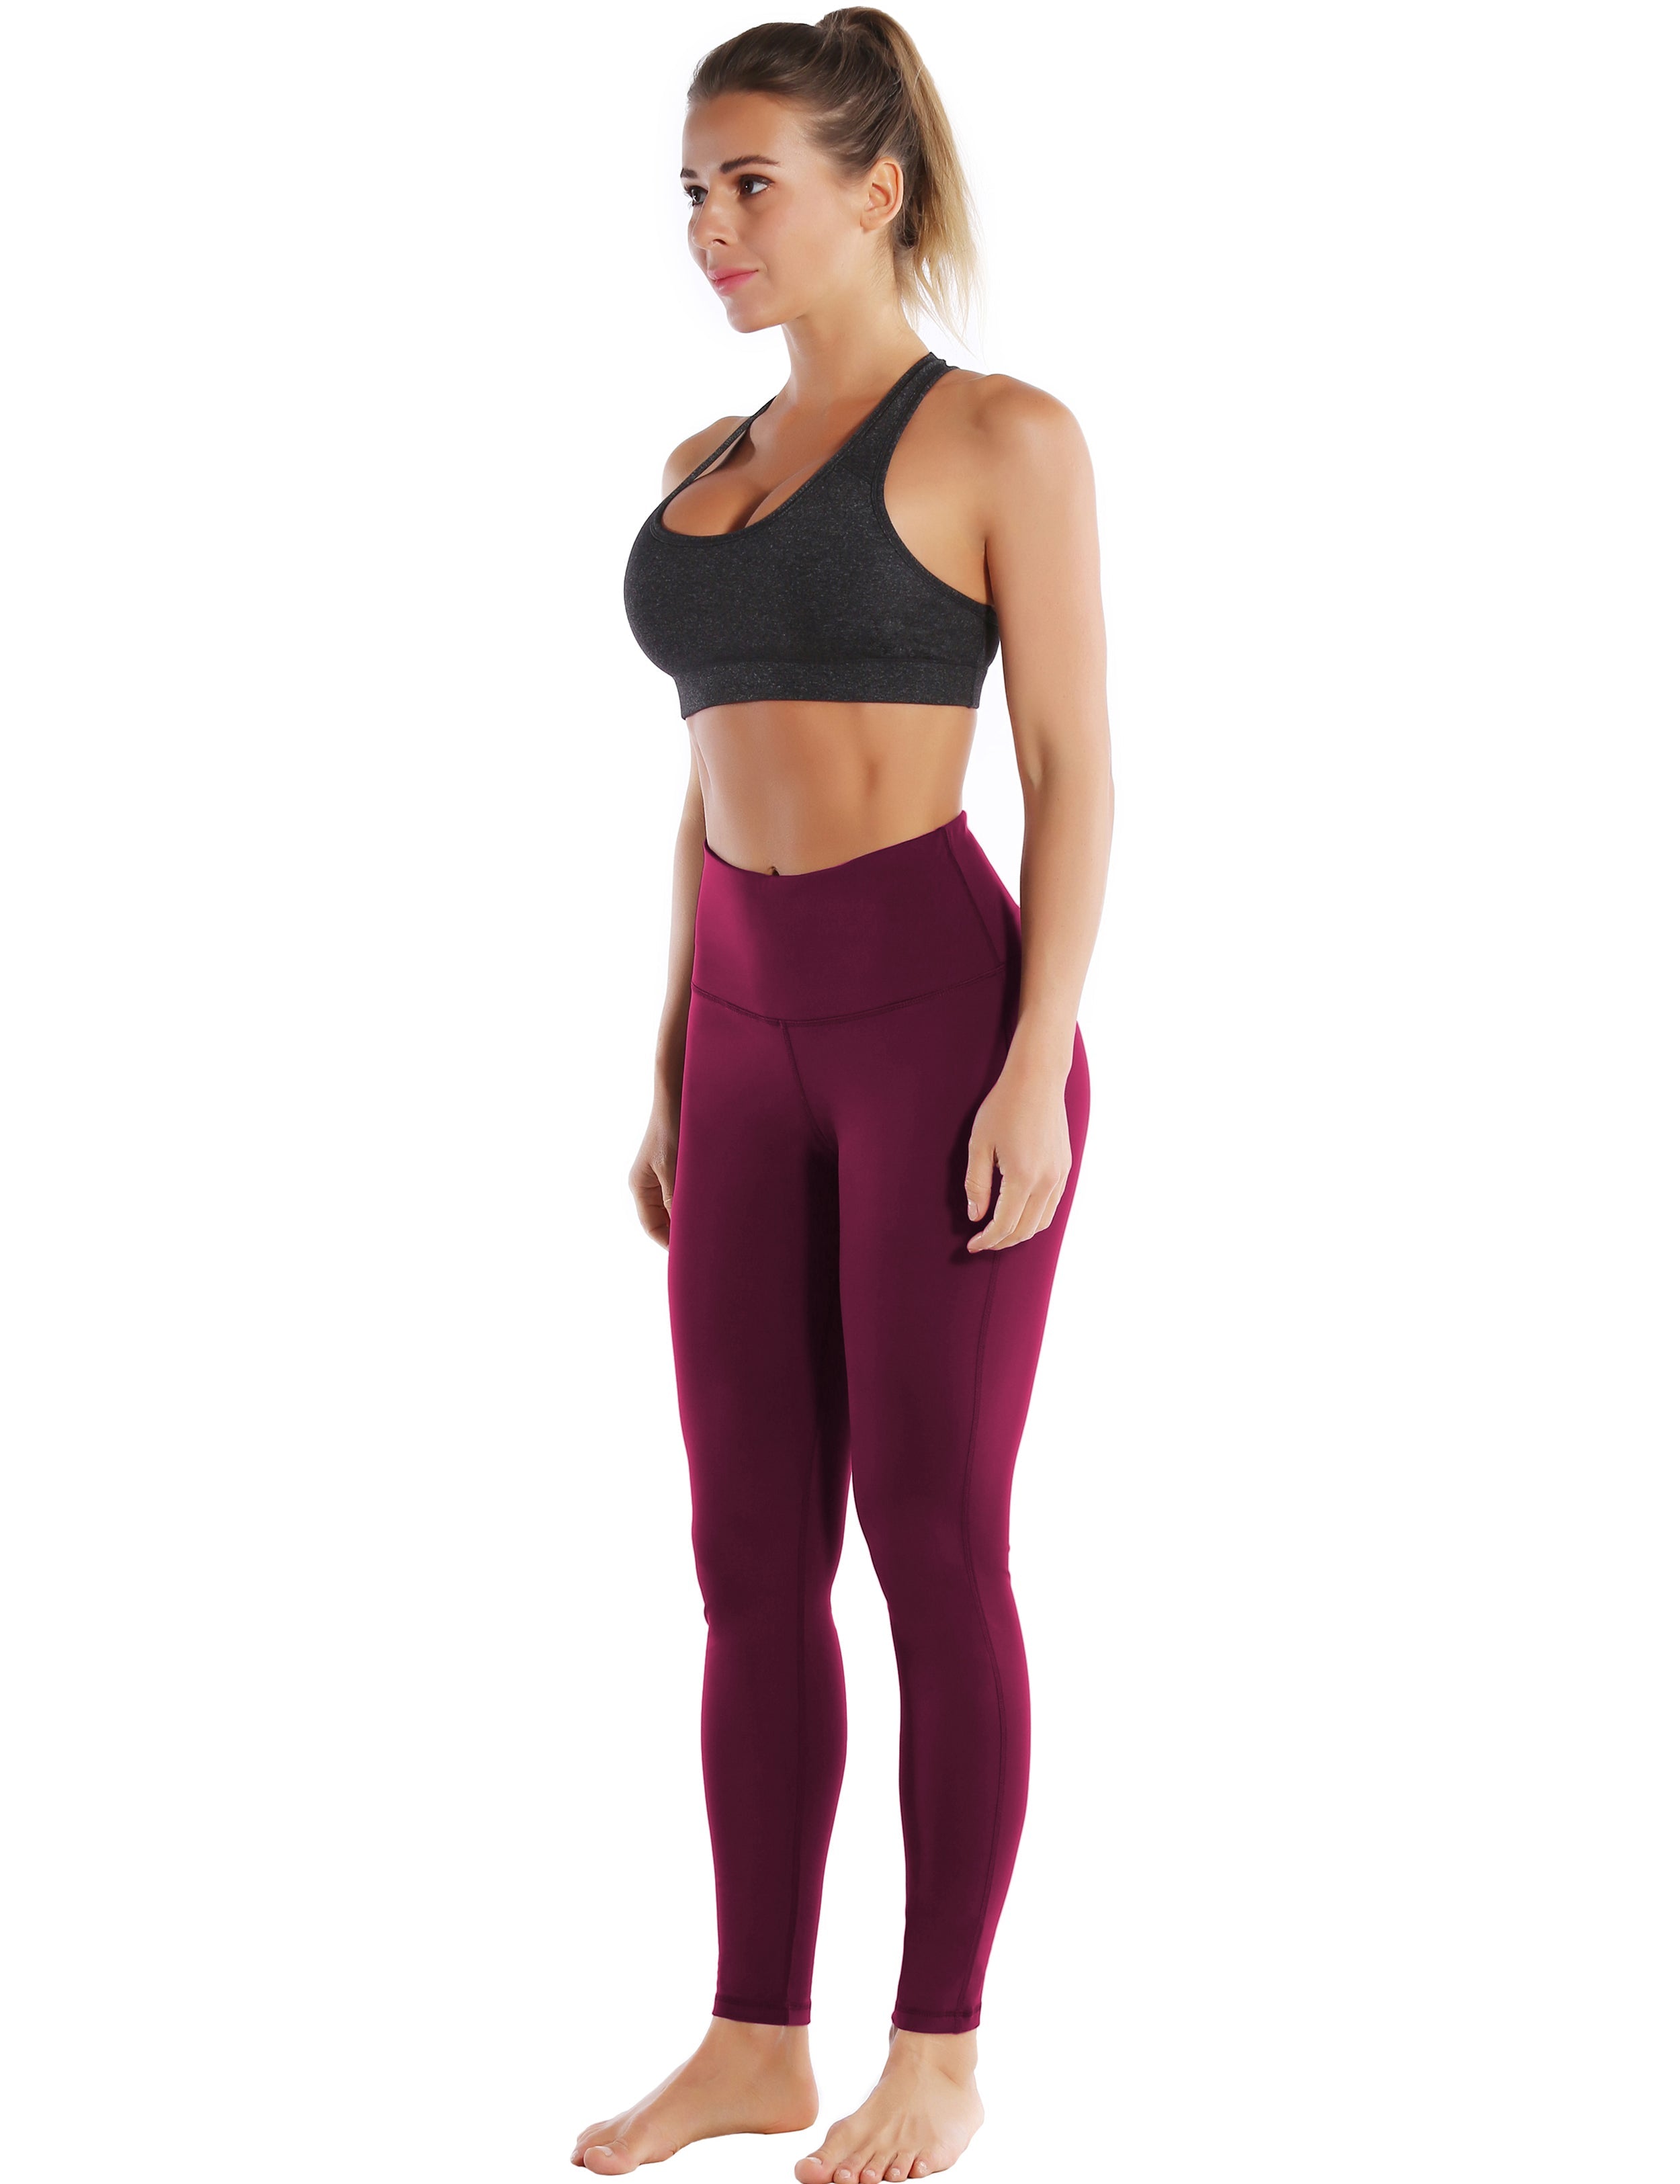 High Waist Side Line Golf Pants grapevine Side Line is Make Your Legs Look Longer and Thinner 75%Nylon/25%Spandex Fabric doesn't attract lint easily 4-way stretch No see-through Moisture-wicking Tummy control Inner pocket Two lengths